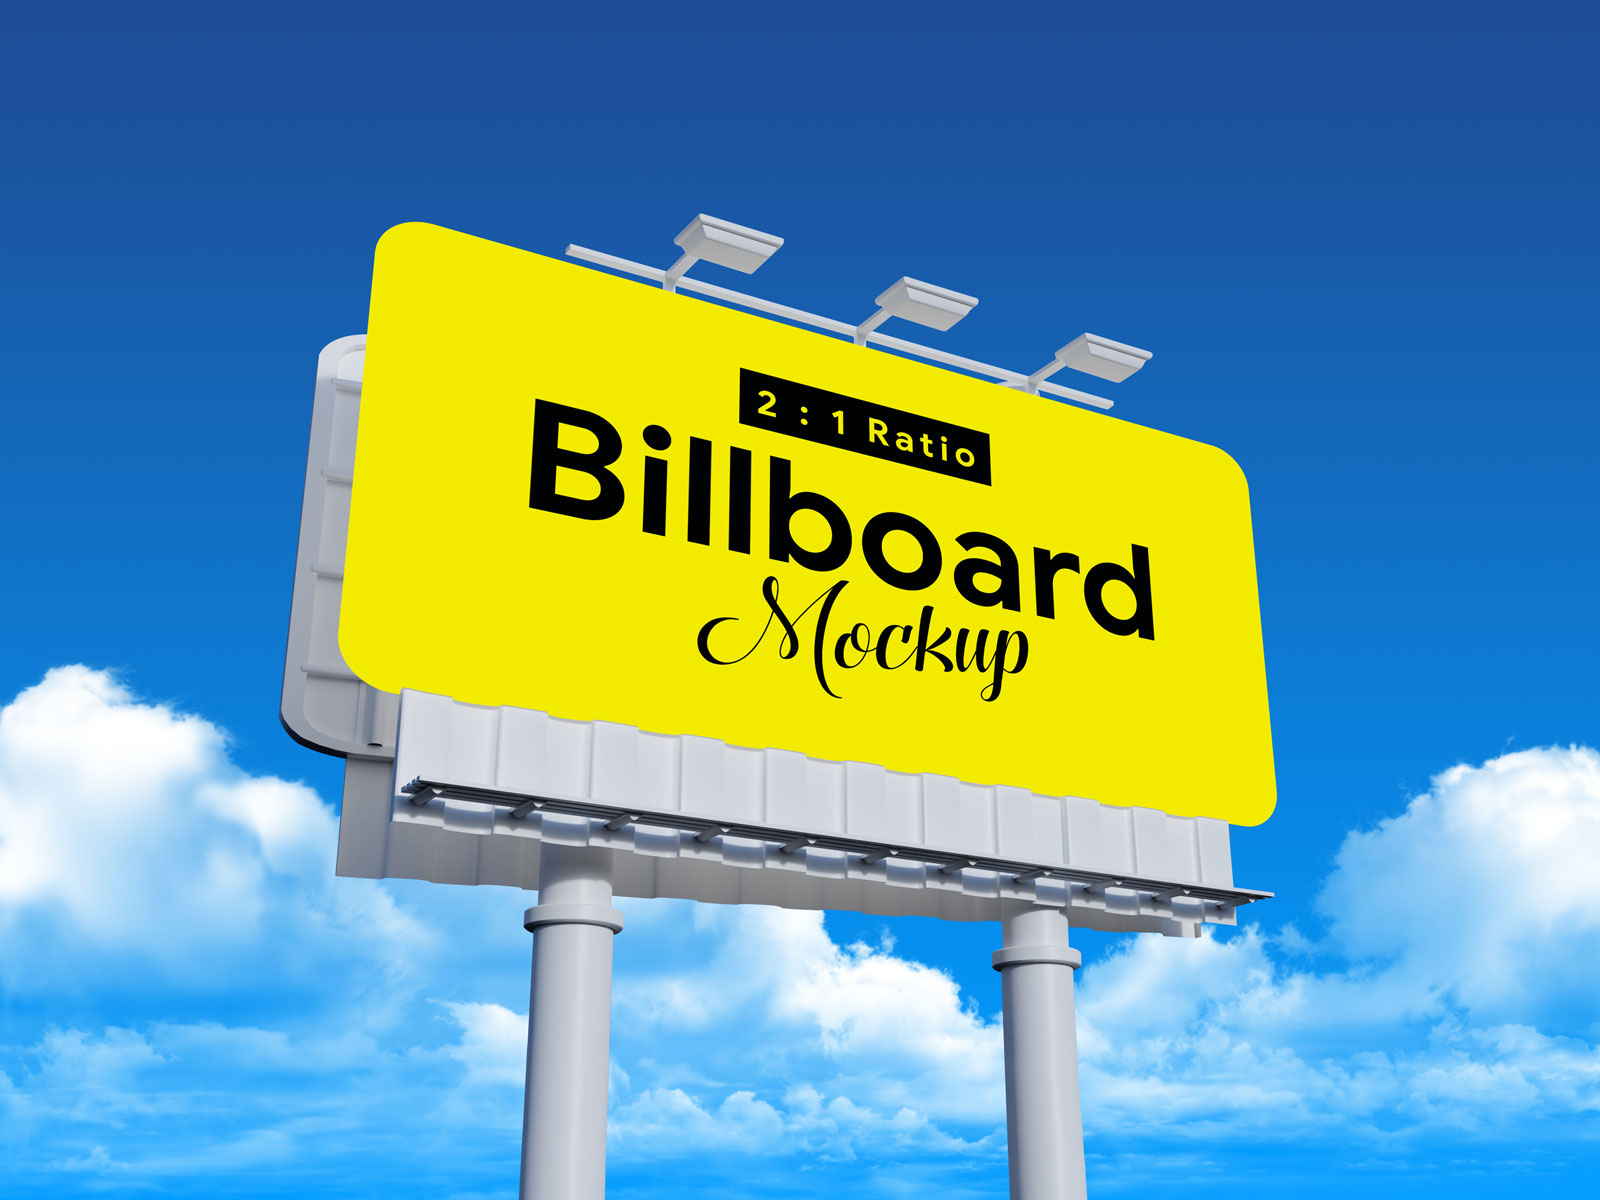 Download Free 2:1 Outdoor Advertising Rounded Corners Billboard Mockup PSD | Designbolts